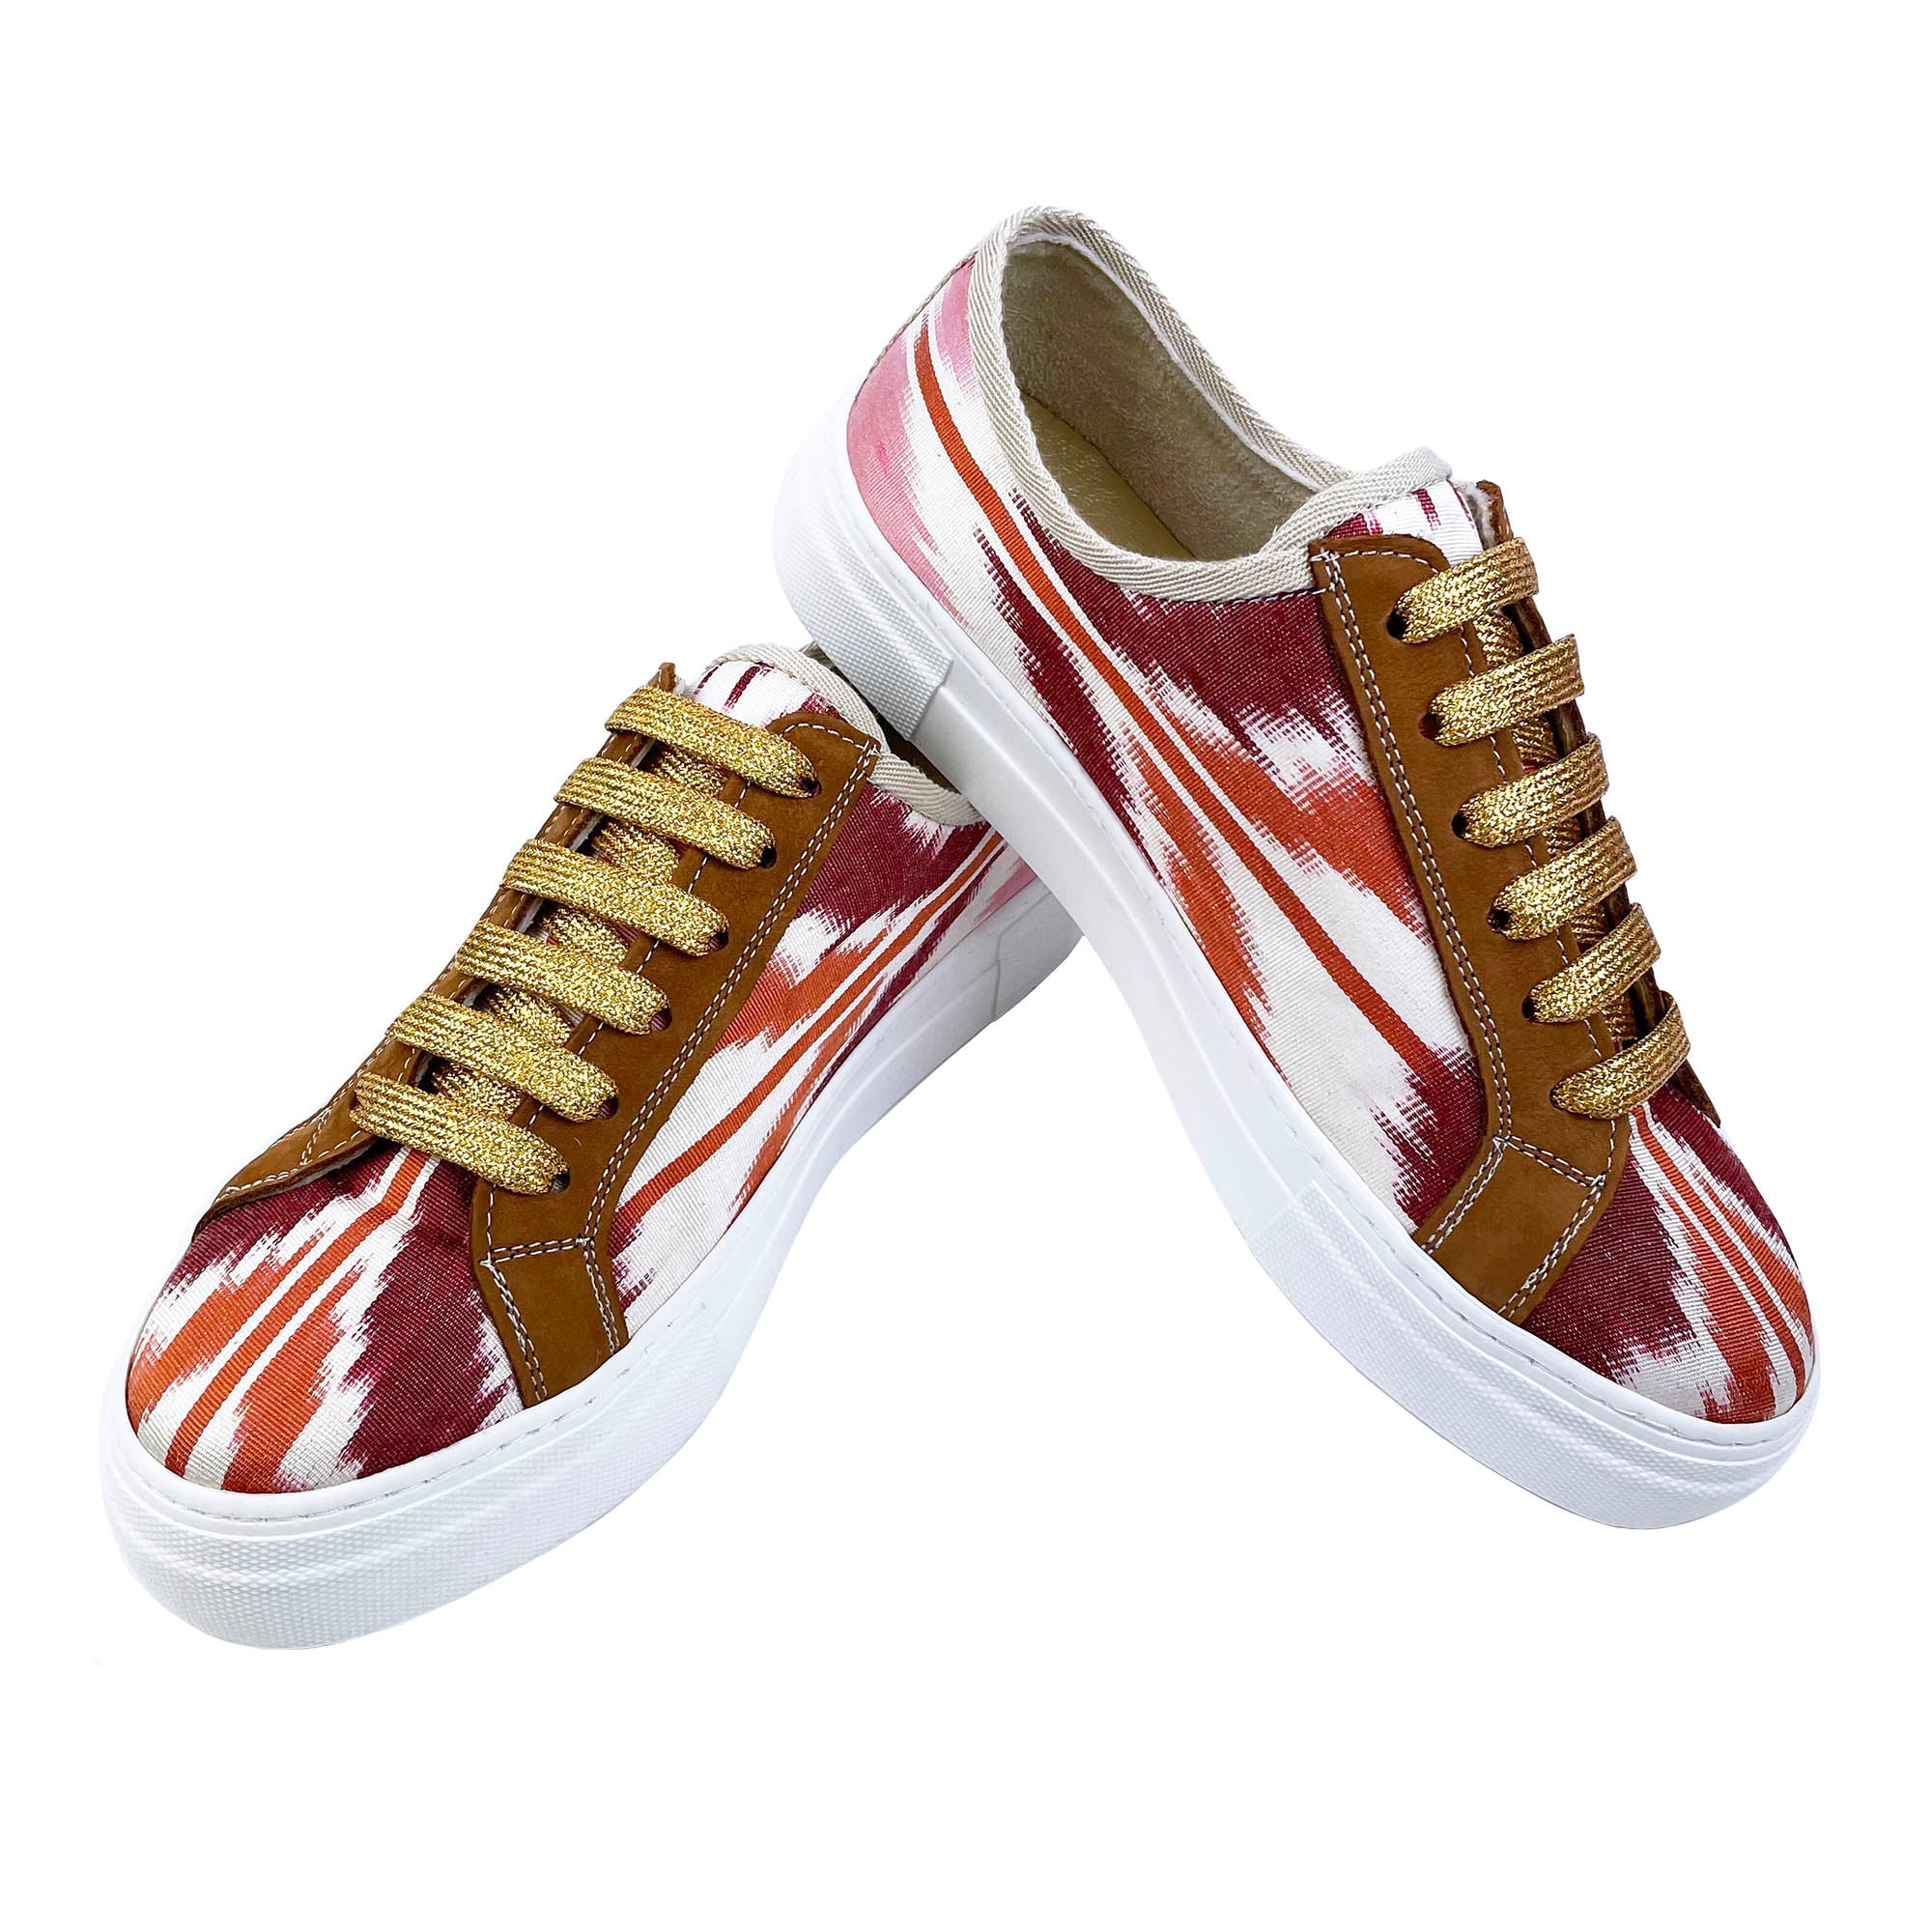 Red, pink, orange and white Ikat silk sneakers with tan leather and gold glitter laces